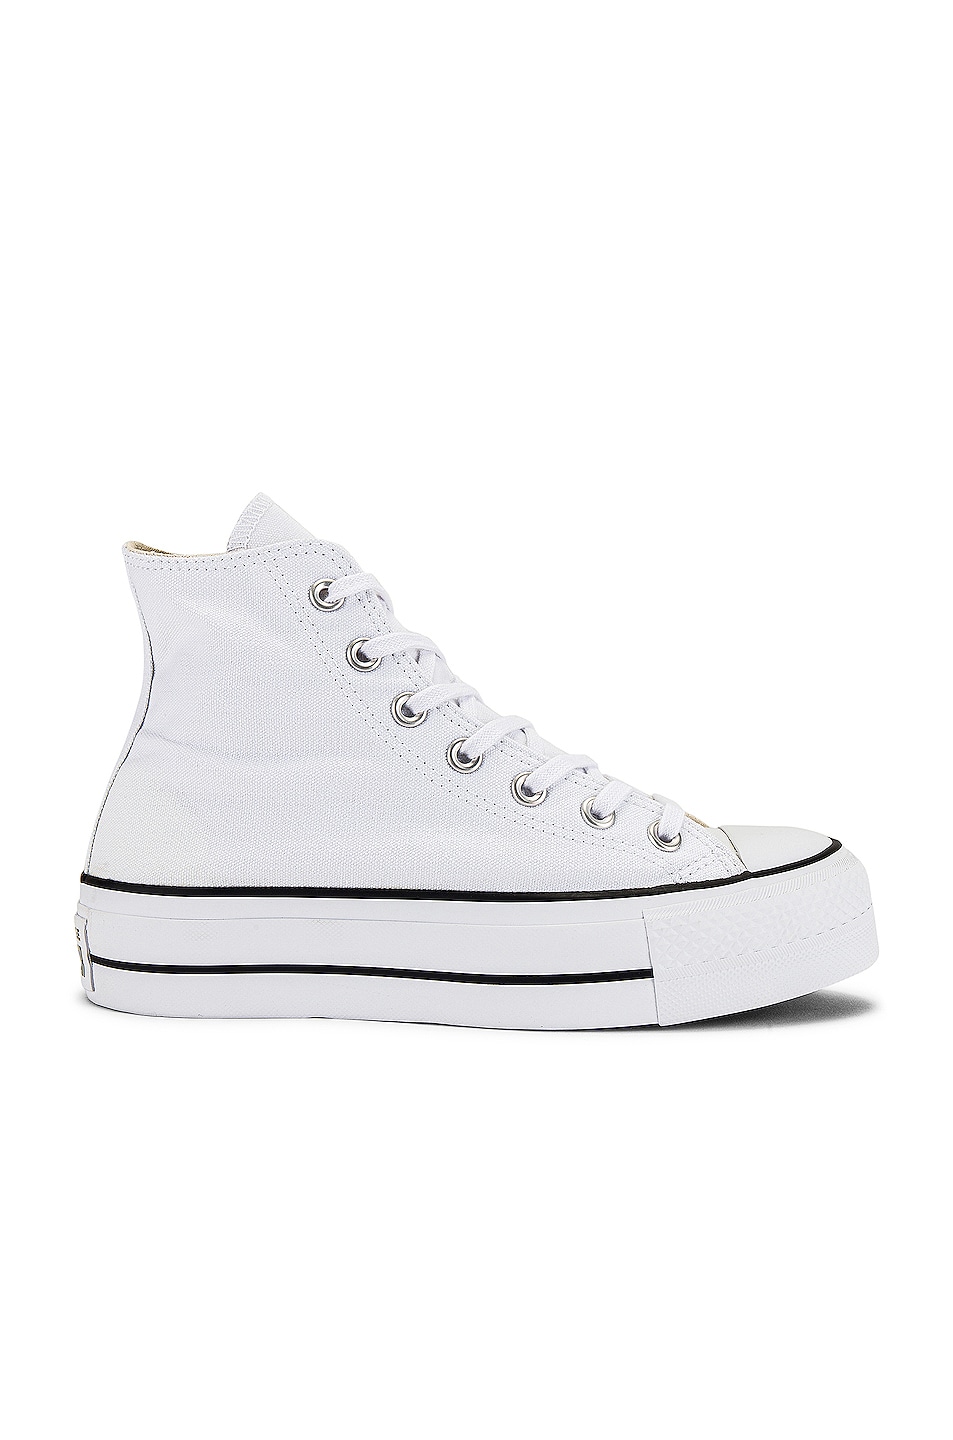 Image 1 of Converse Chuck Taylor All Star Platform Canvas in White & Black